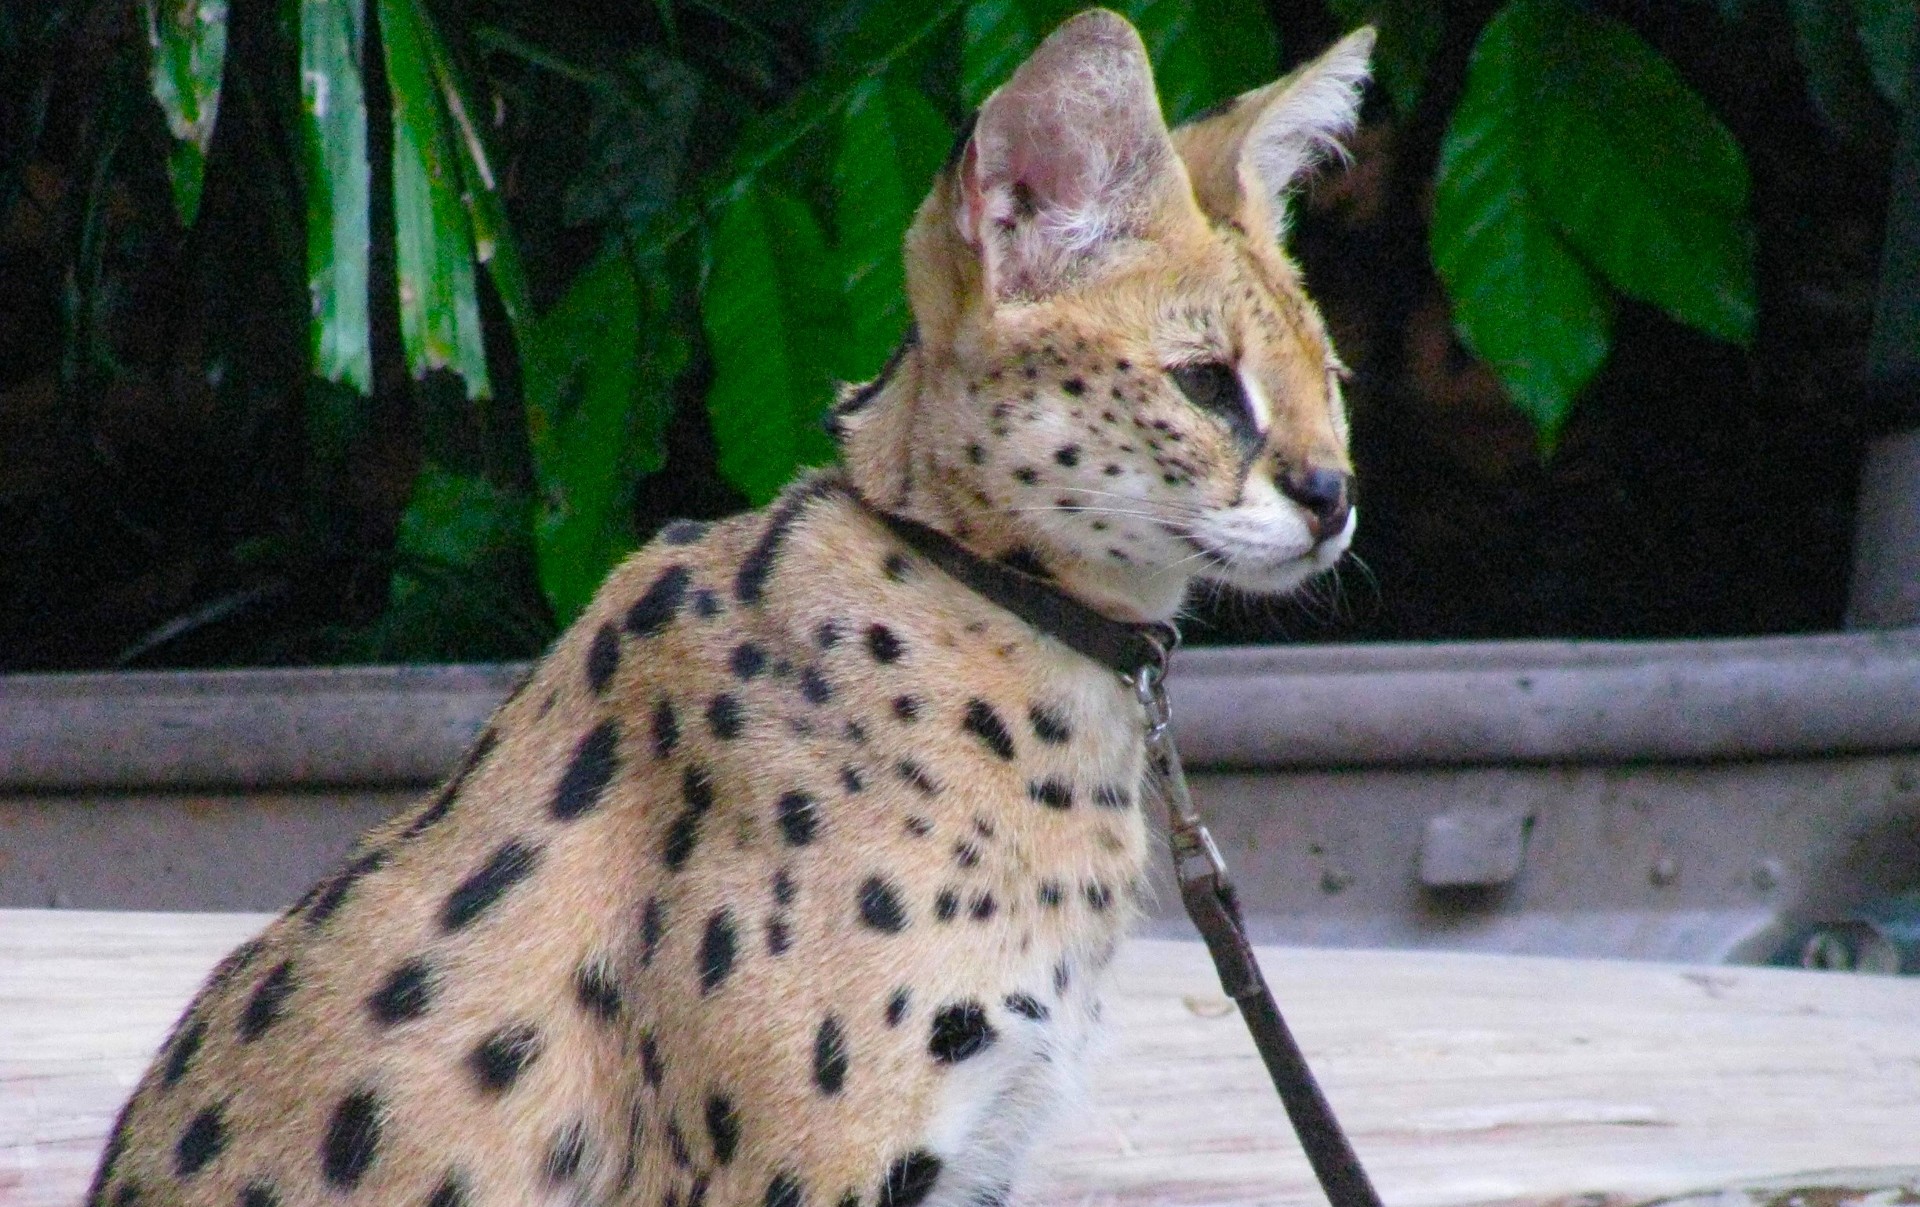 A serval cat wearing a collar and lead